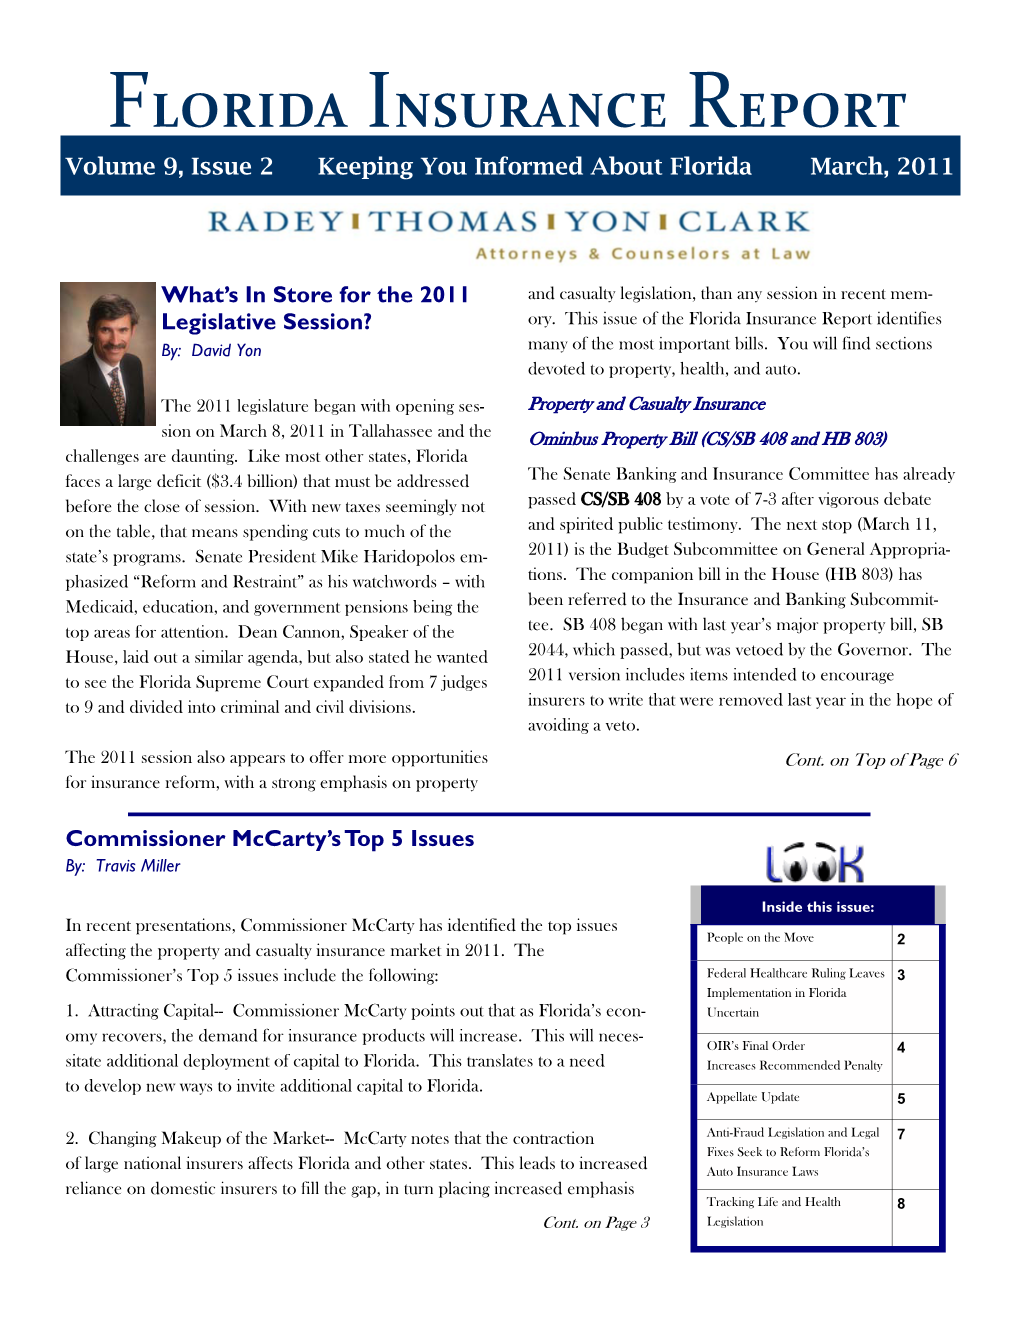 FLORIDA INSURANCE REPORT Volume 9, Issue 2 Keeping You Informed About Florida March, 2011